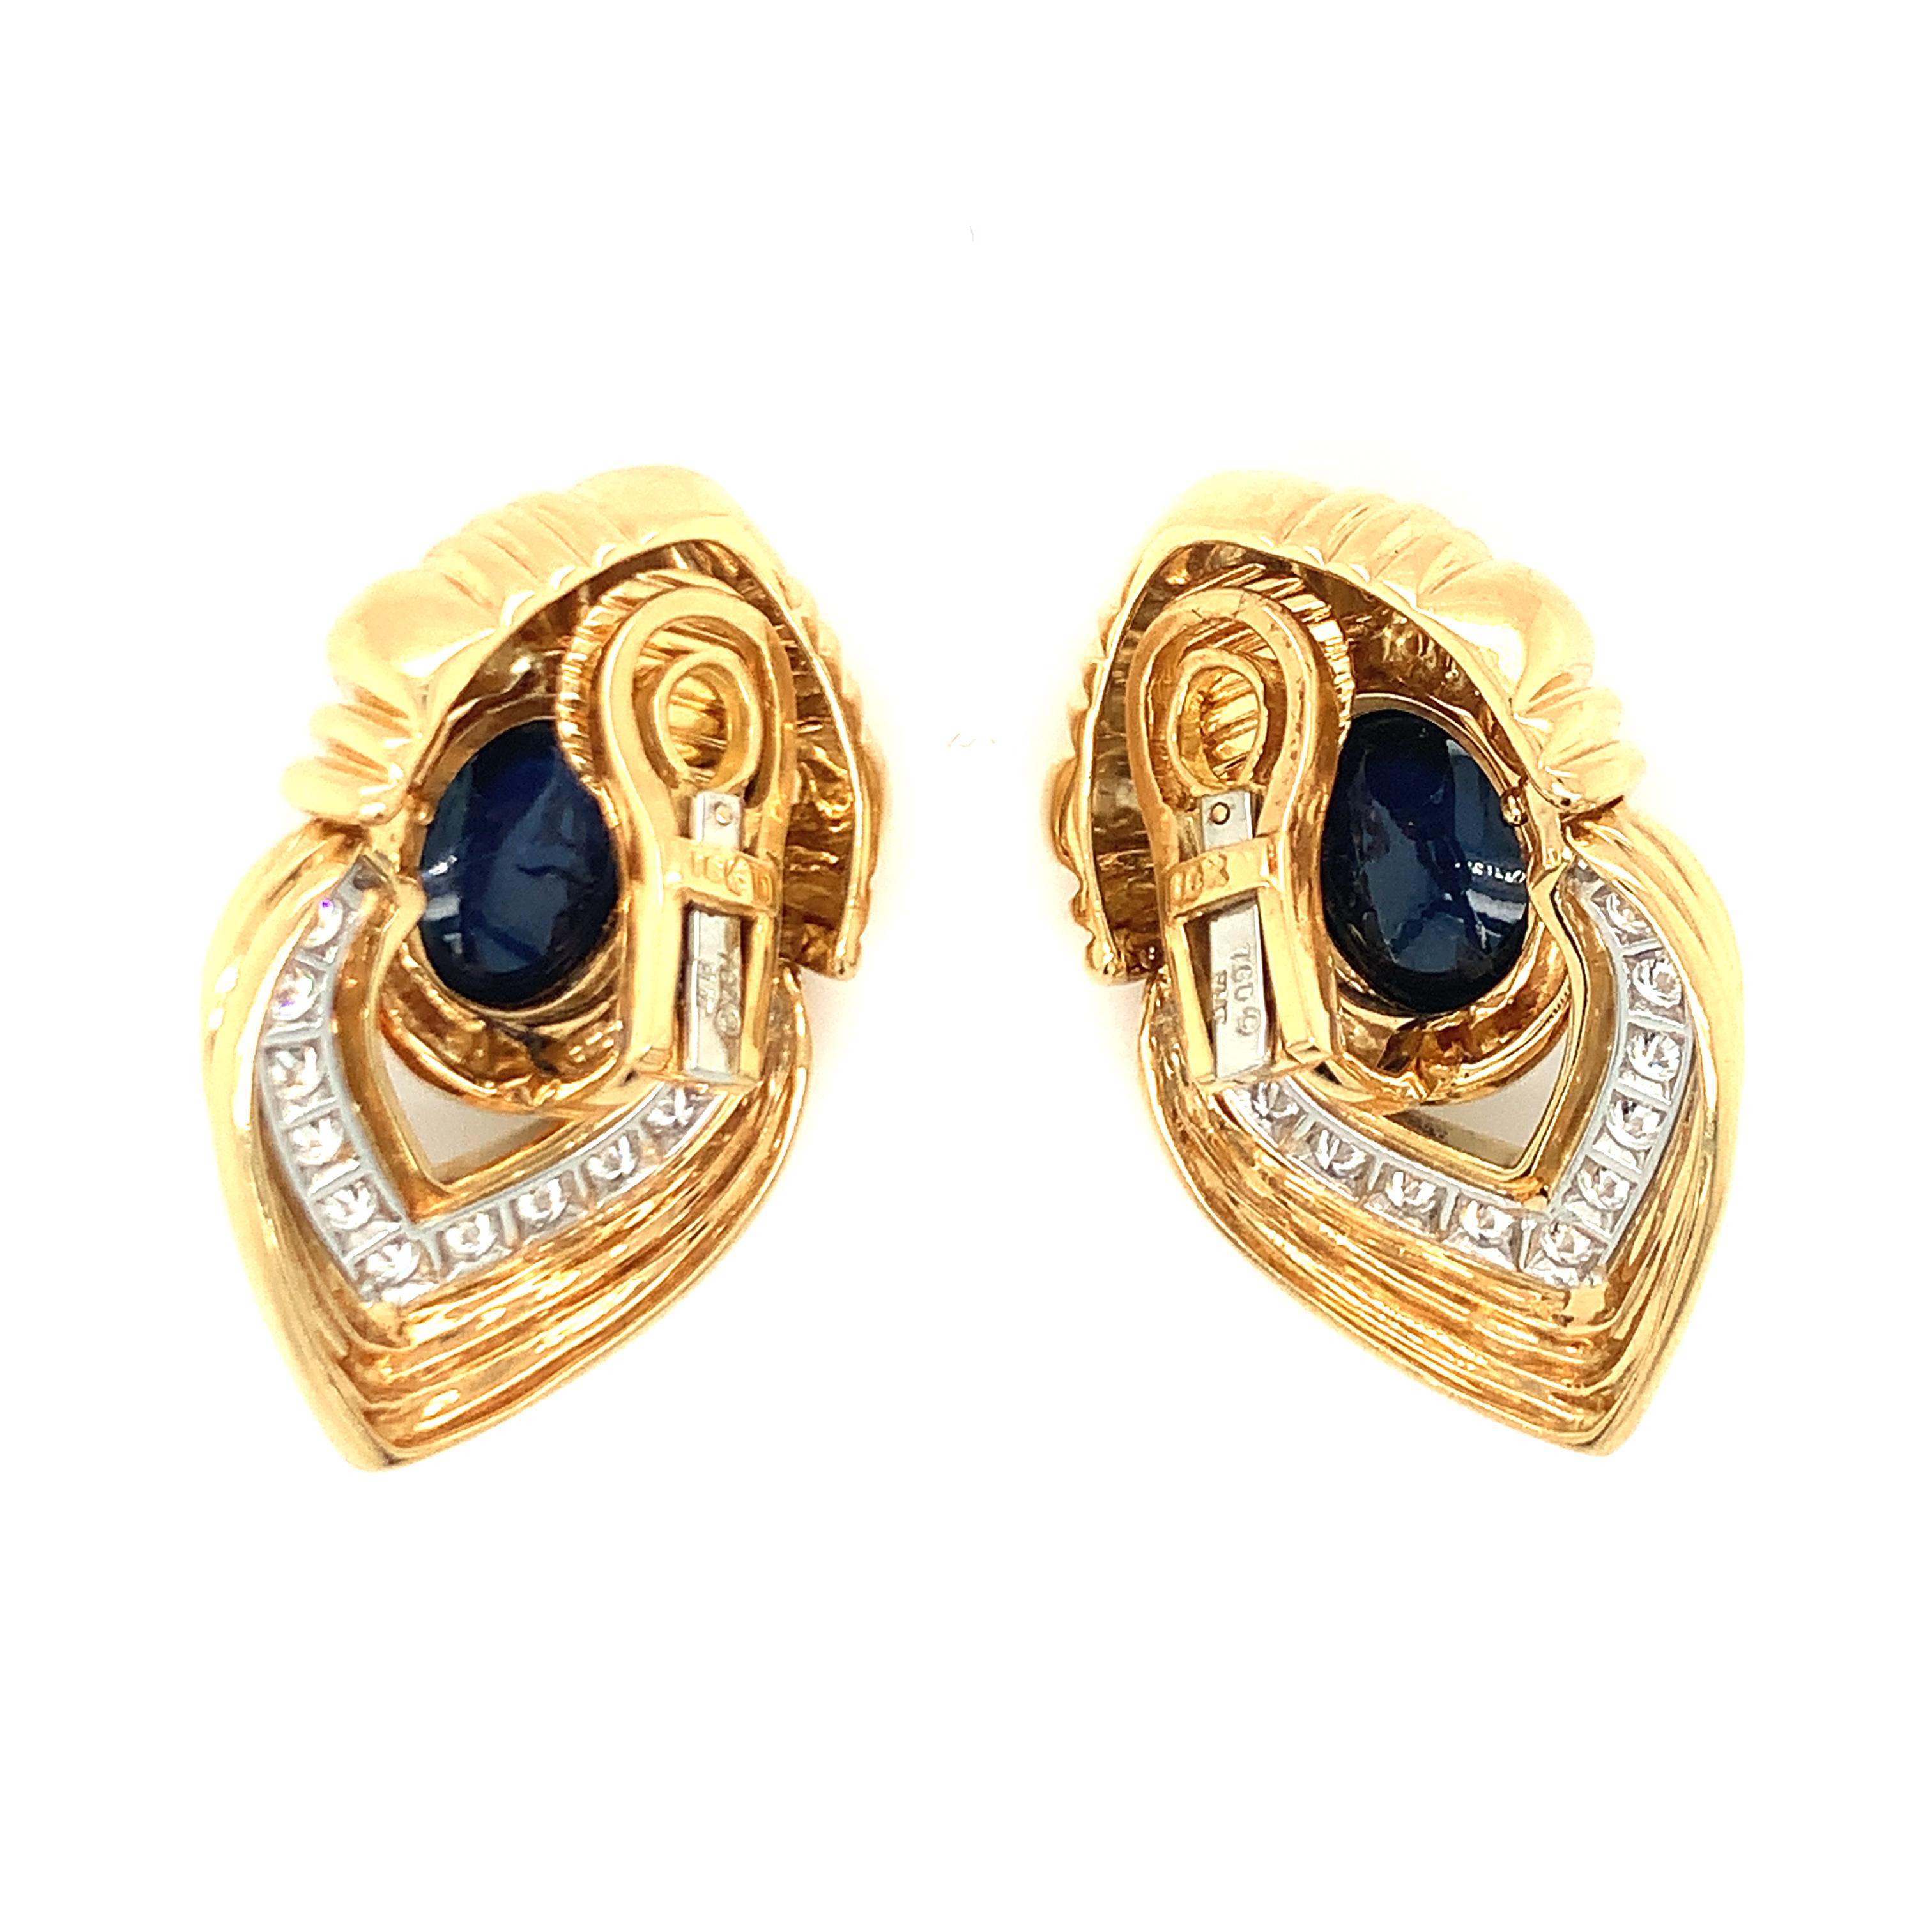 One pair of sapphire and diamond platinum and 18K yellow gold earclips featuring two bezel set, oval cabochon cut blue sapphires weighing 12 ct. in total (6 ct. each). The earrings feature a fluted door-knocker design accented with 26 round